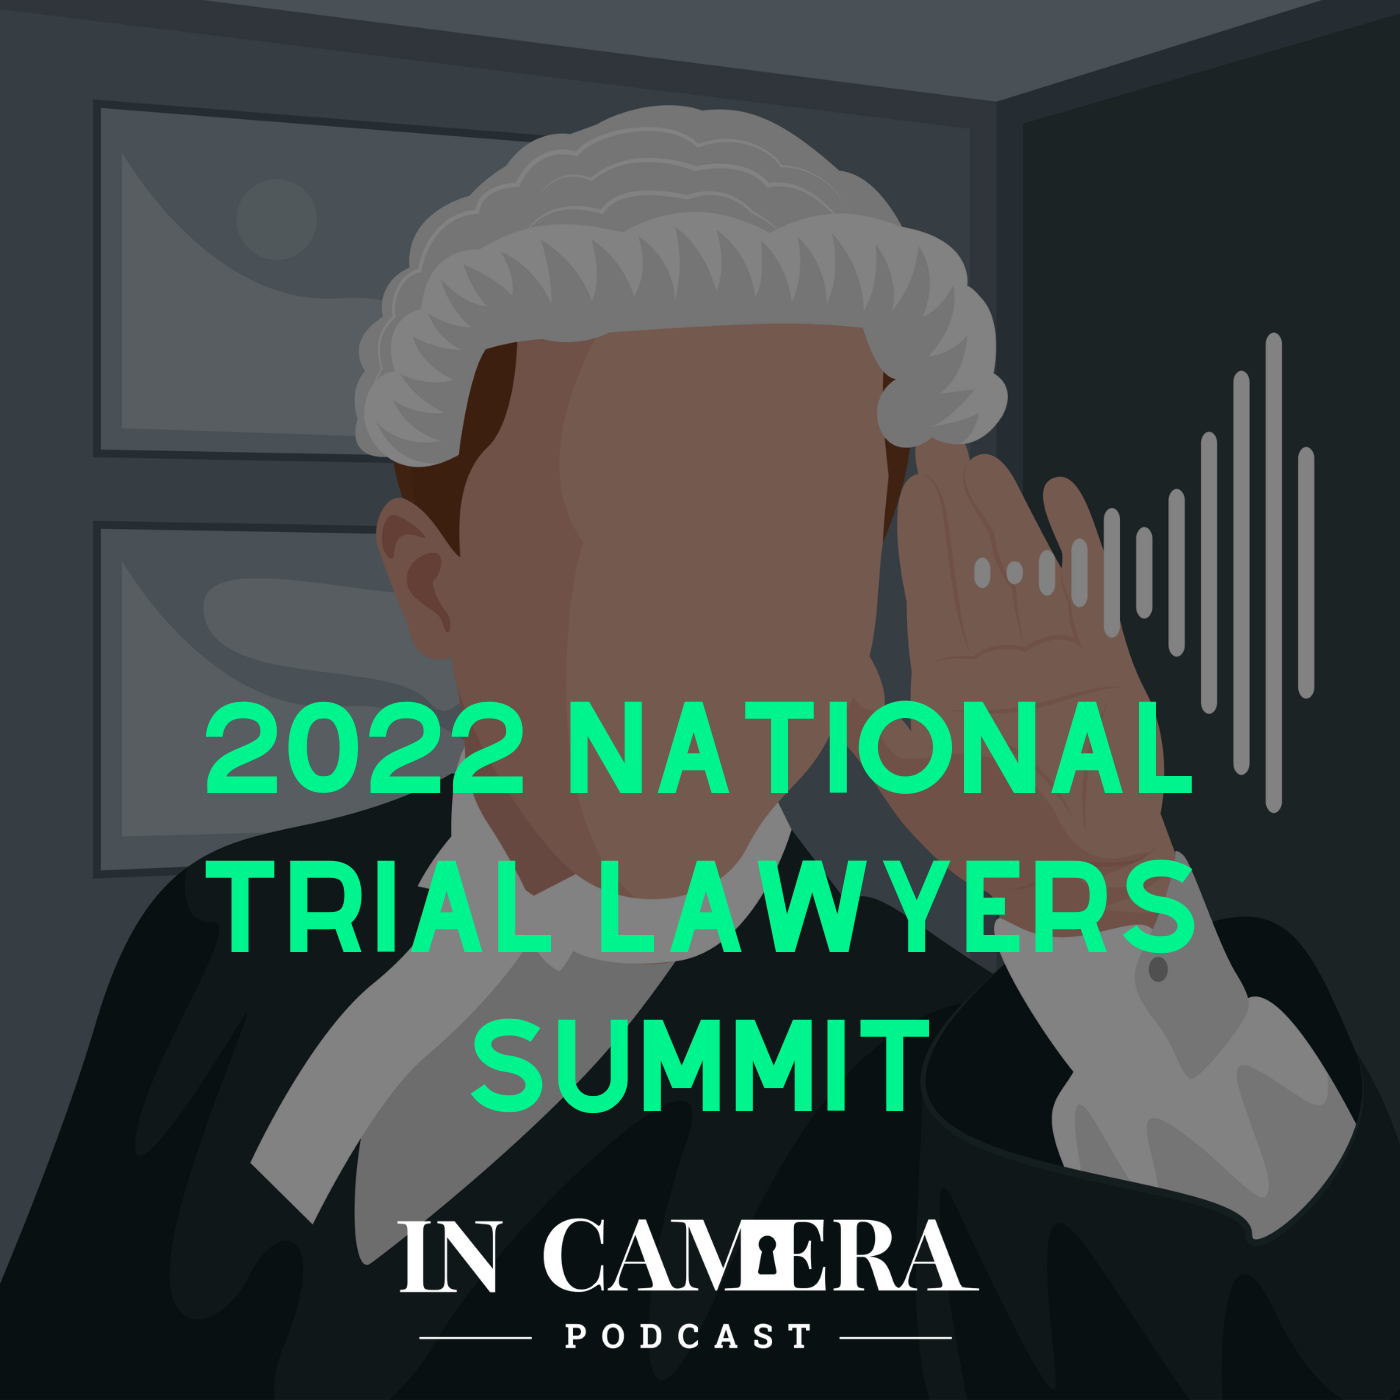 S4 E5 2022 National Trial Lawyers Summit In Camera Podcast